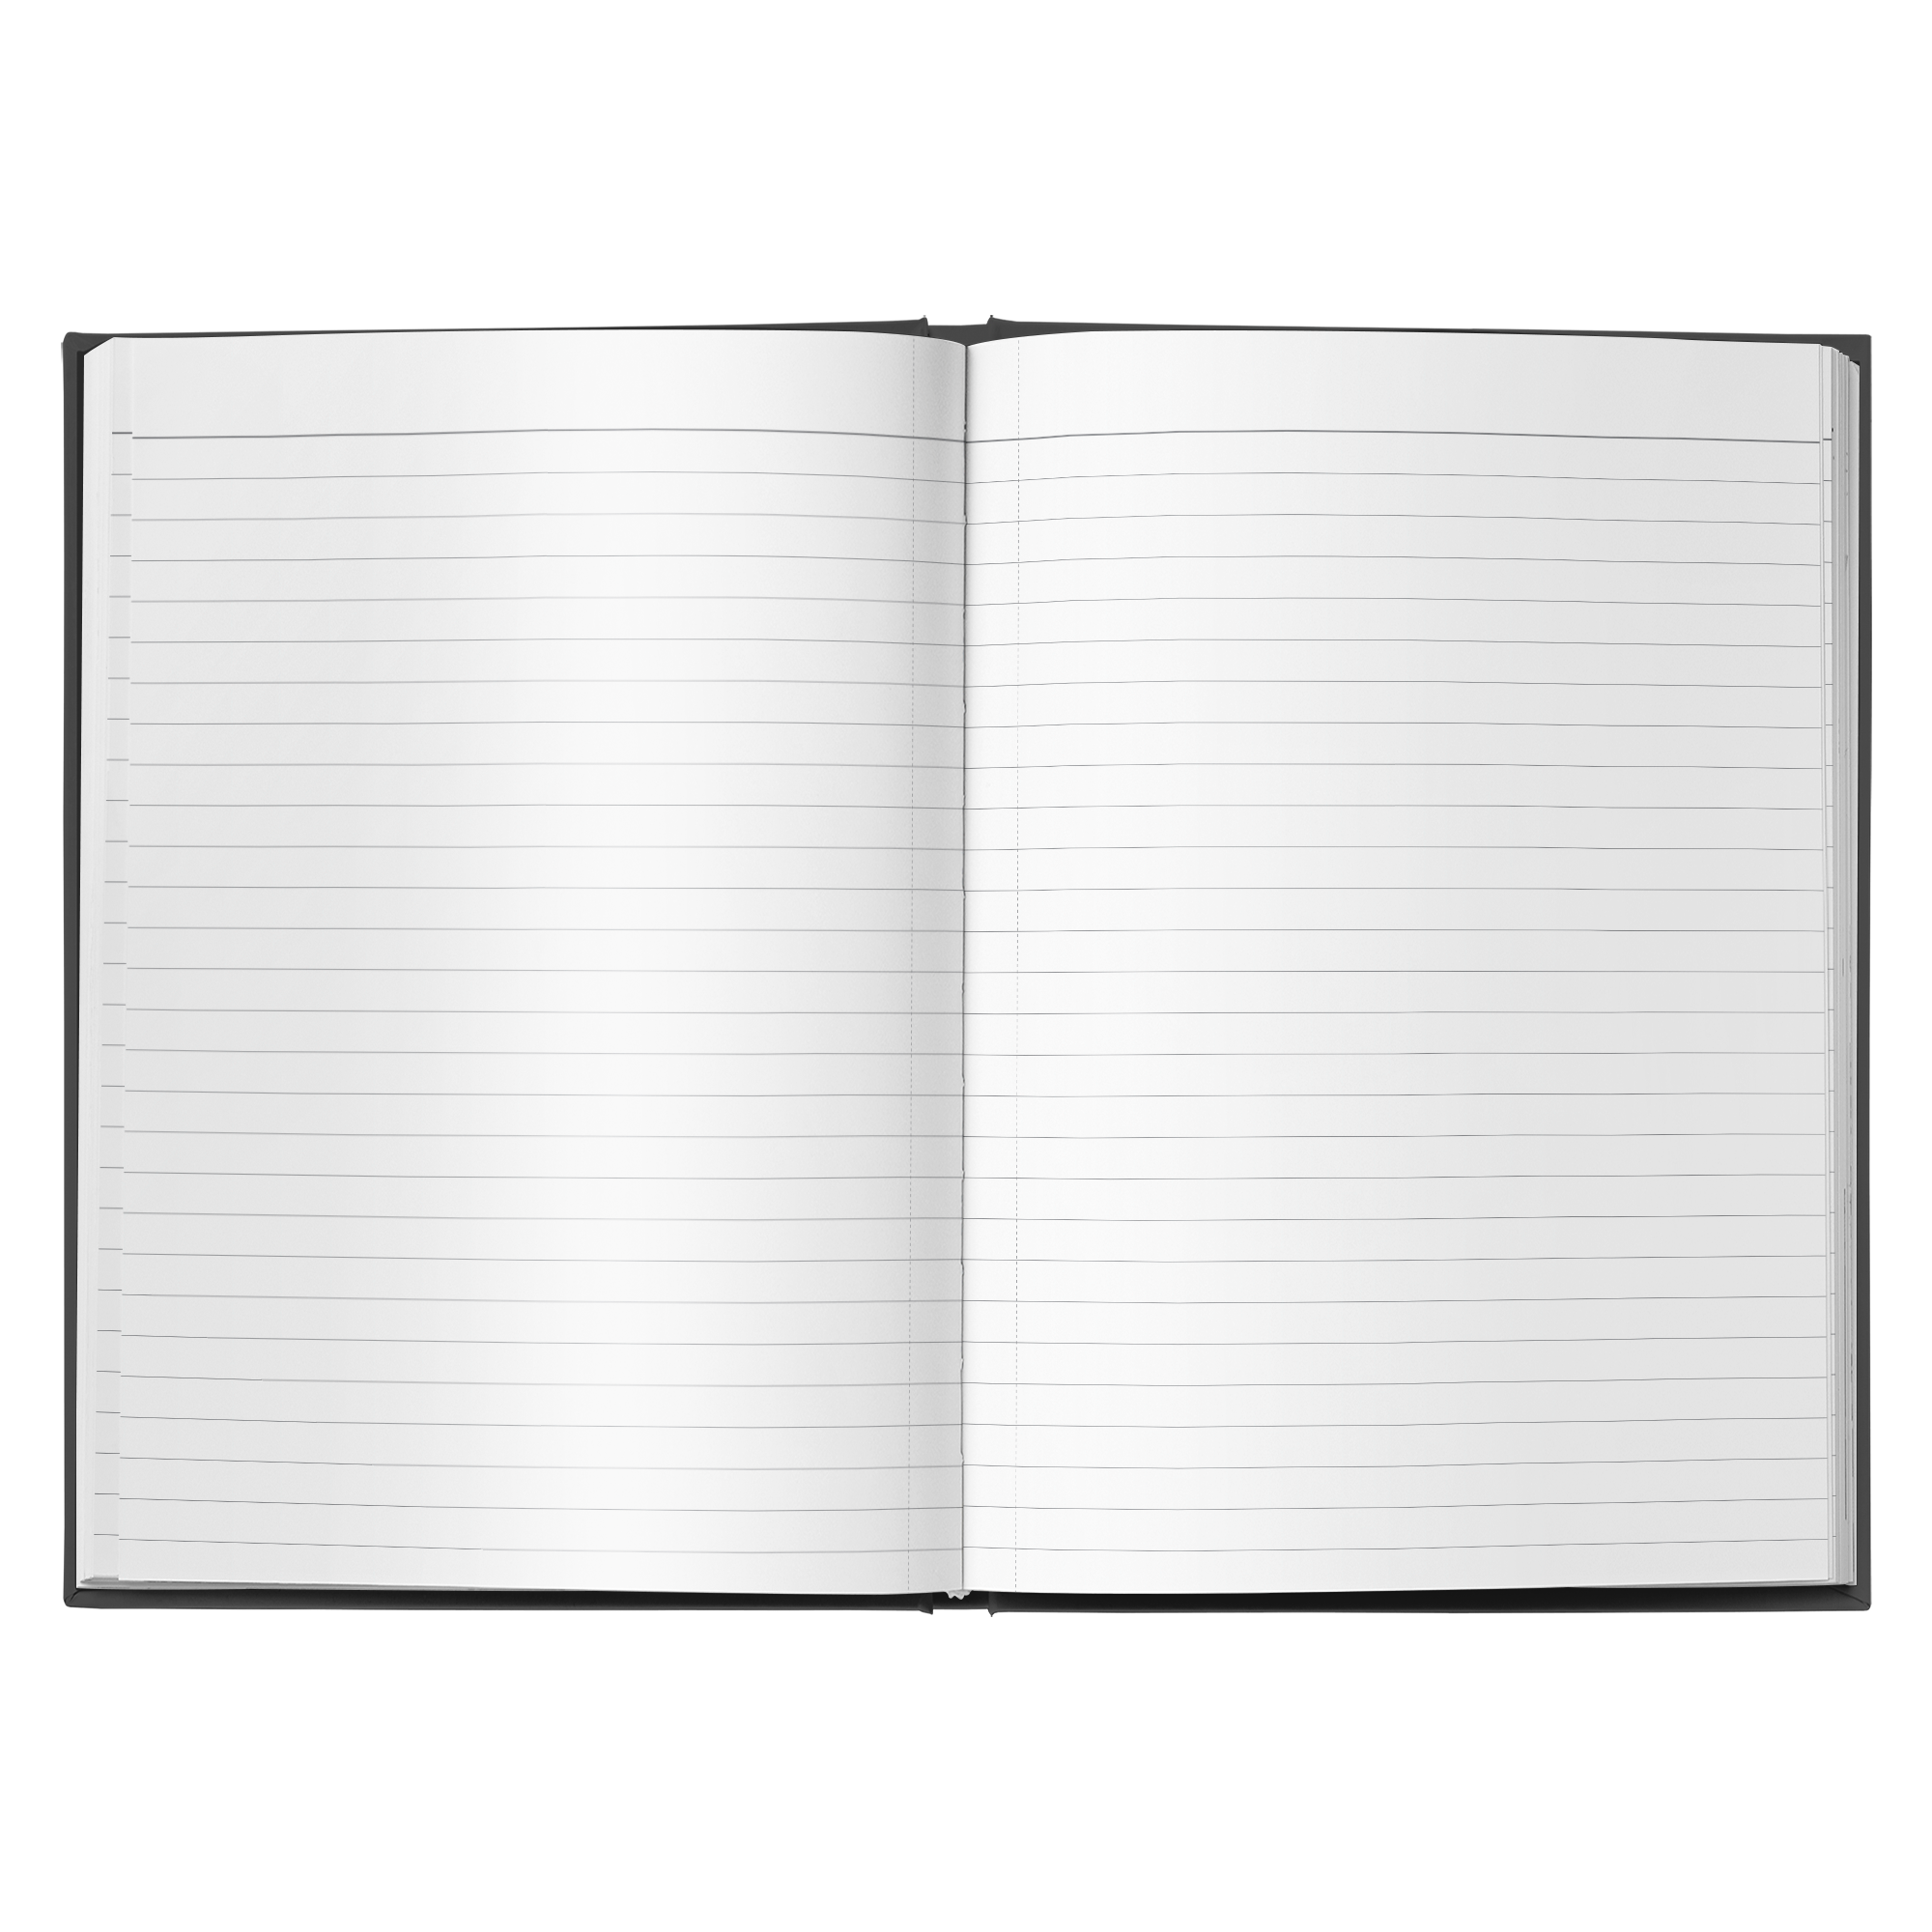 Nothing In My Hands (150 Page Hardcover Journal)